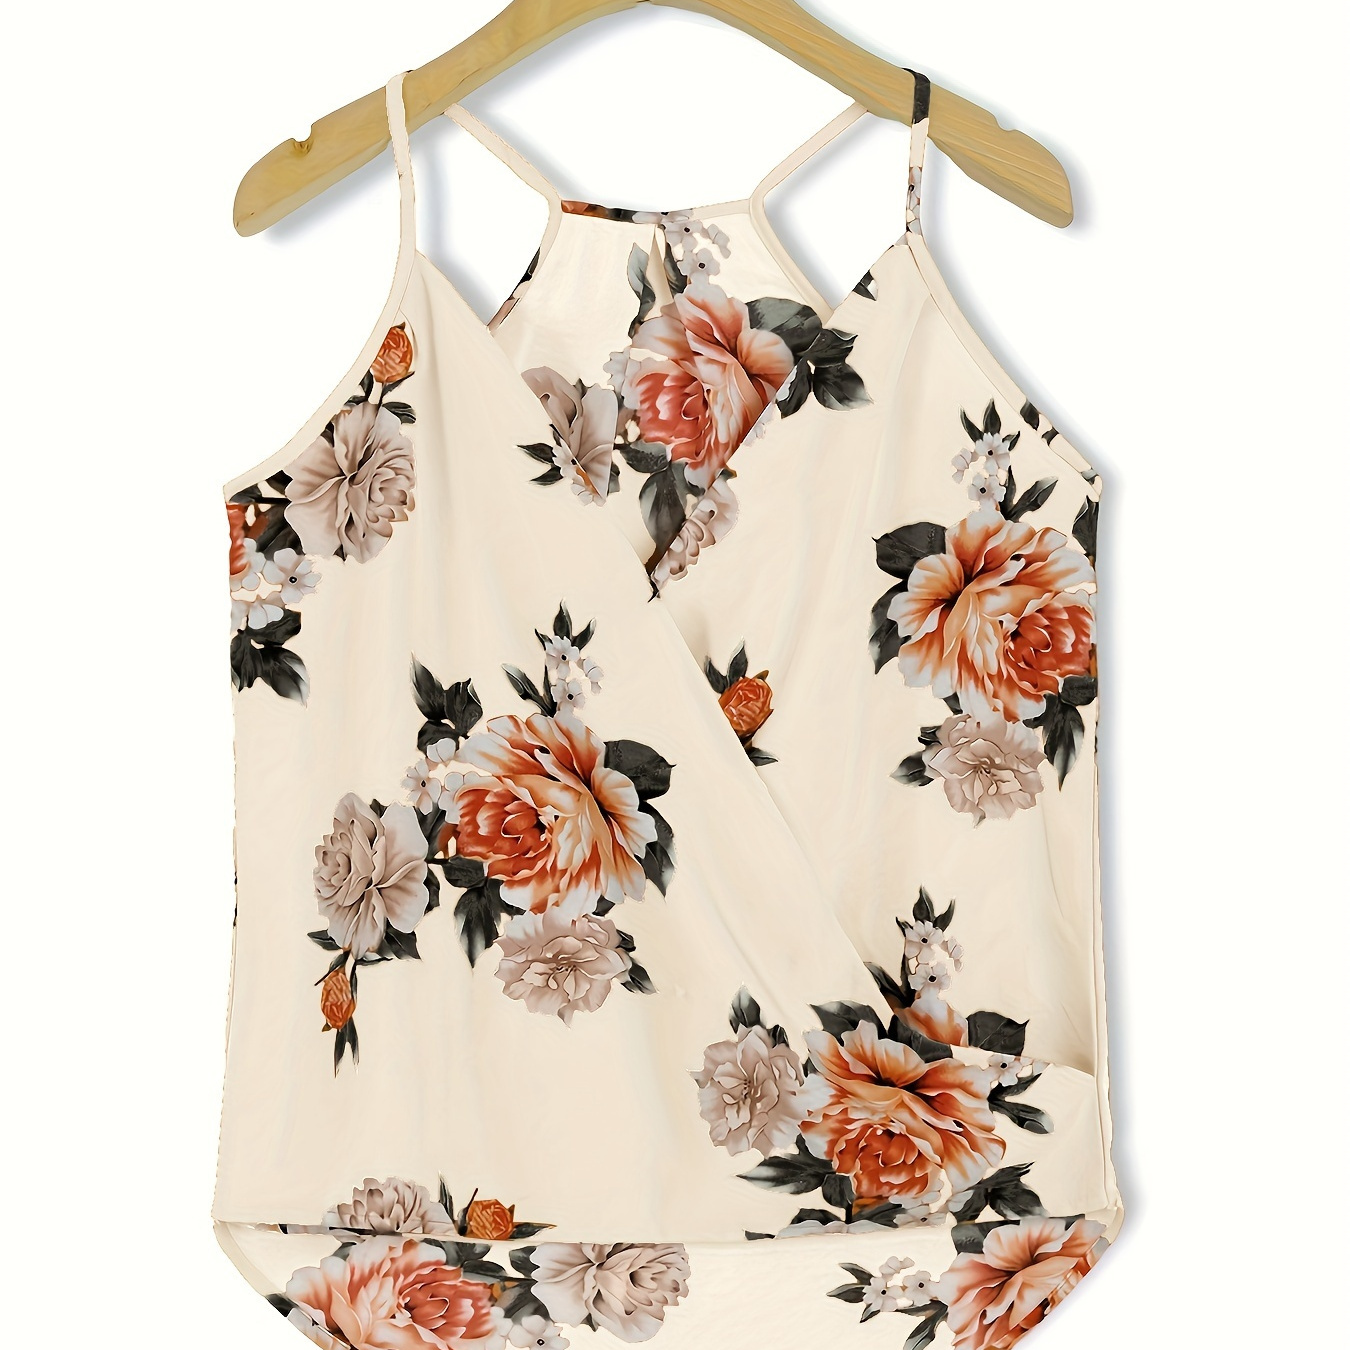 

Floral Print Dipped Hem Cami Top, Casual Spaghetti Sleeveless Summer Cami Top, Women's Clothing